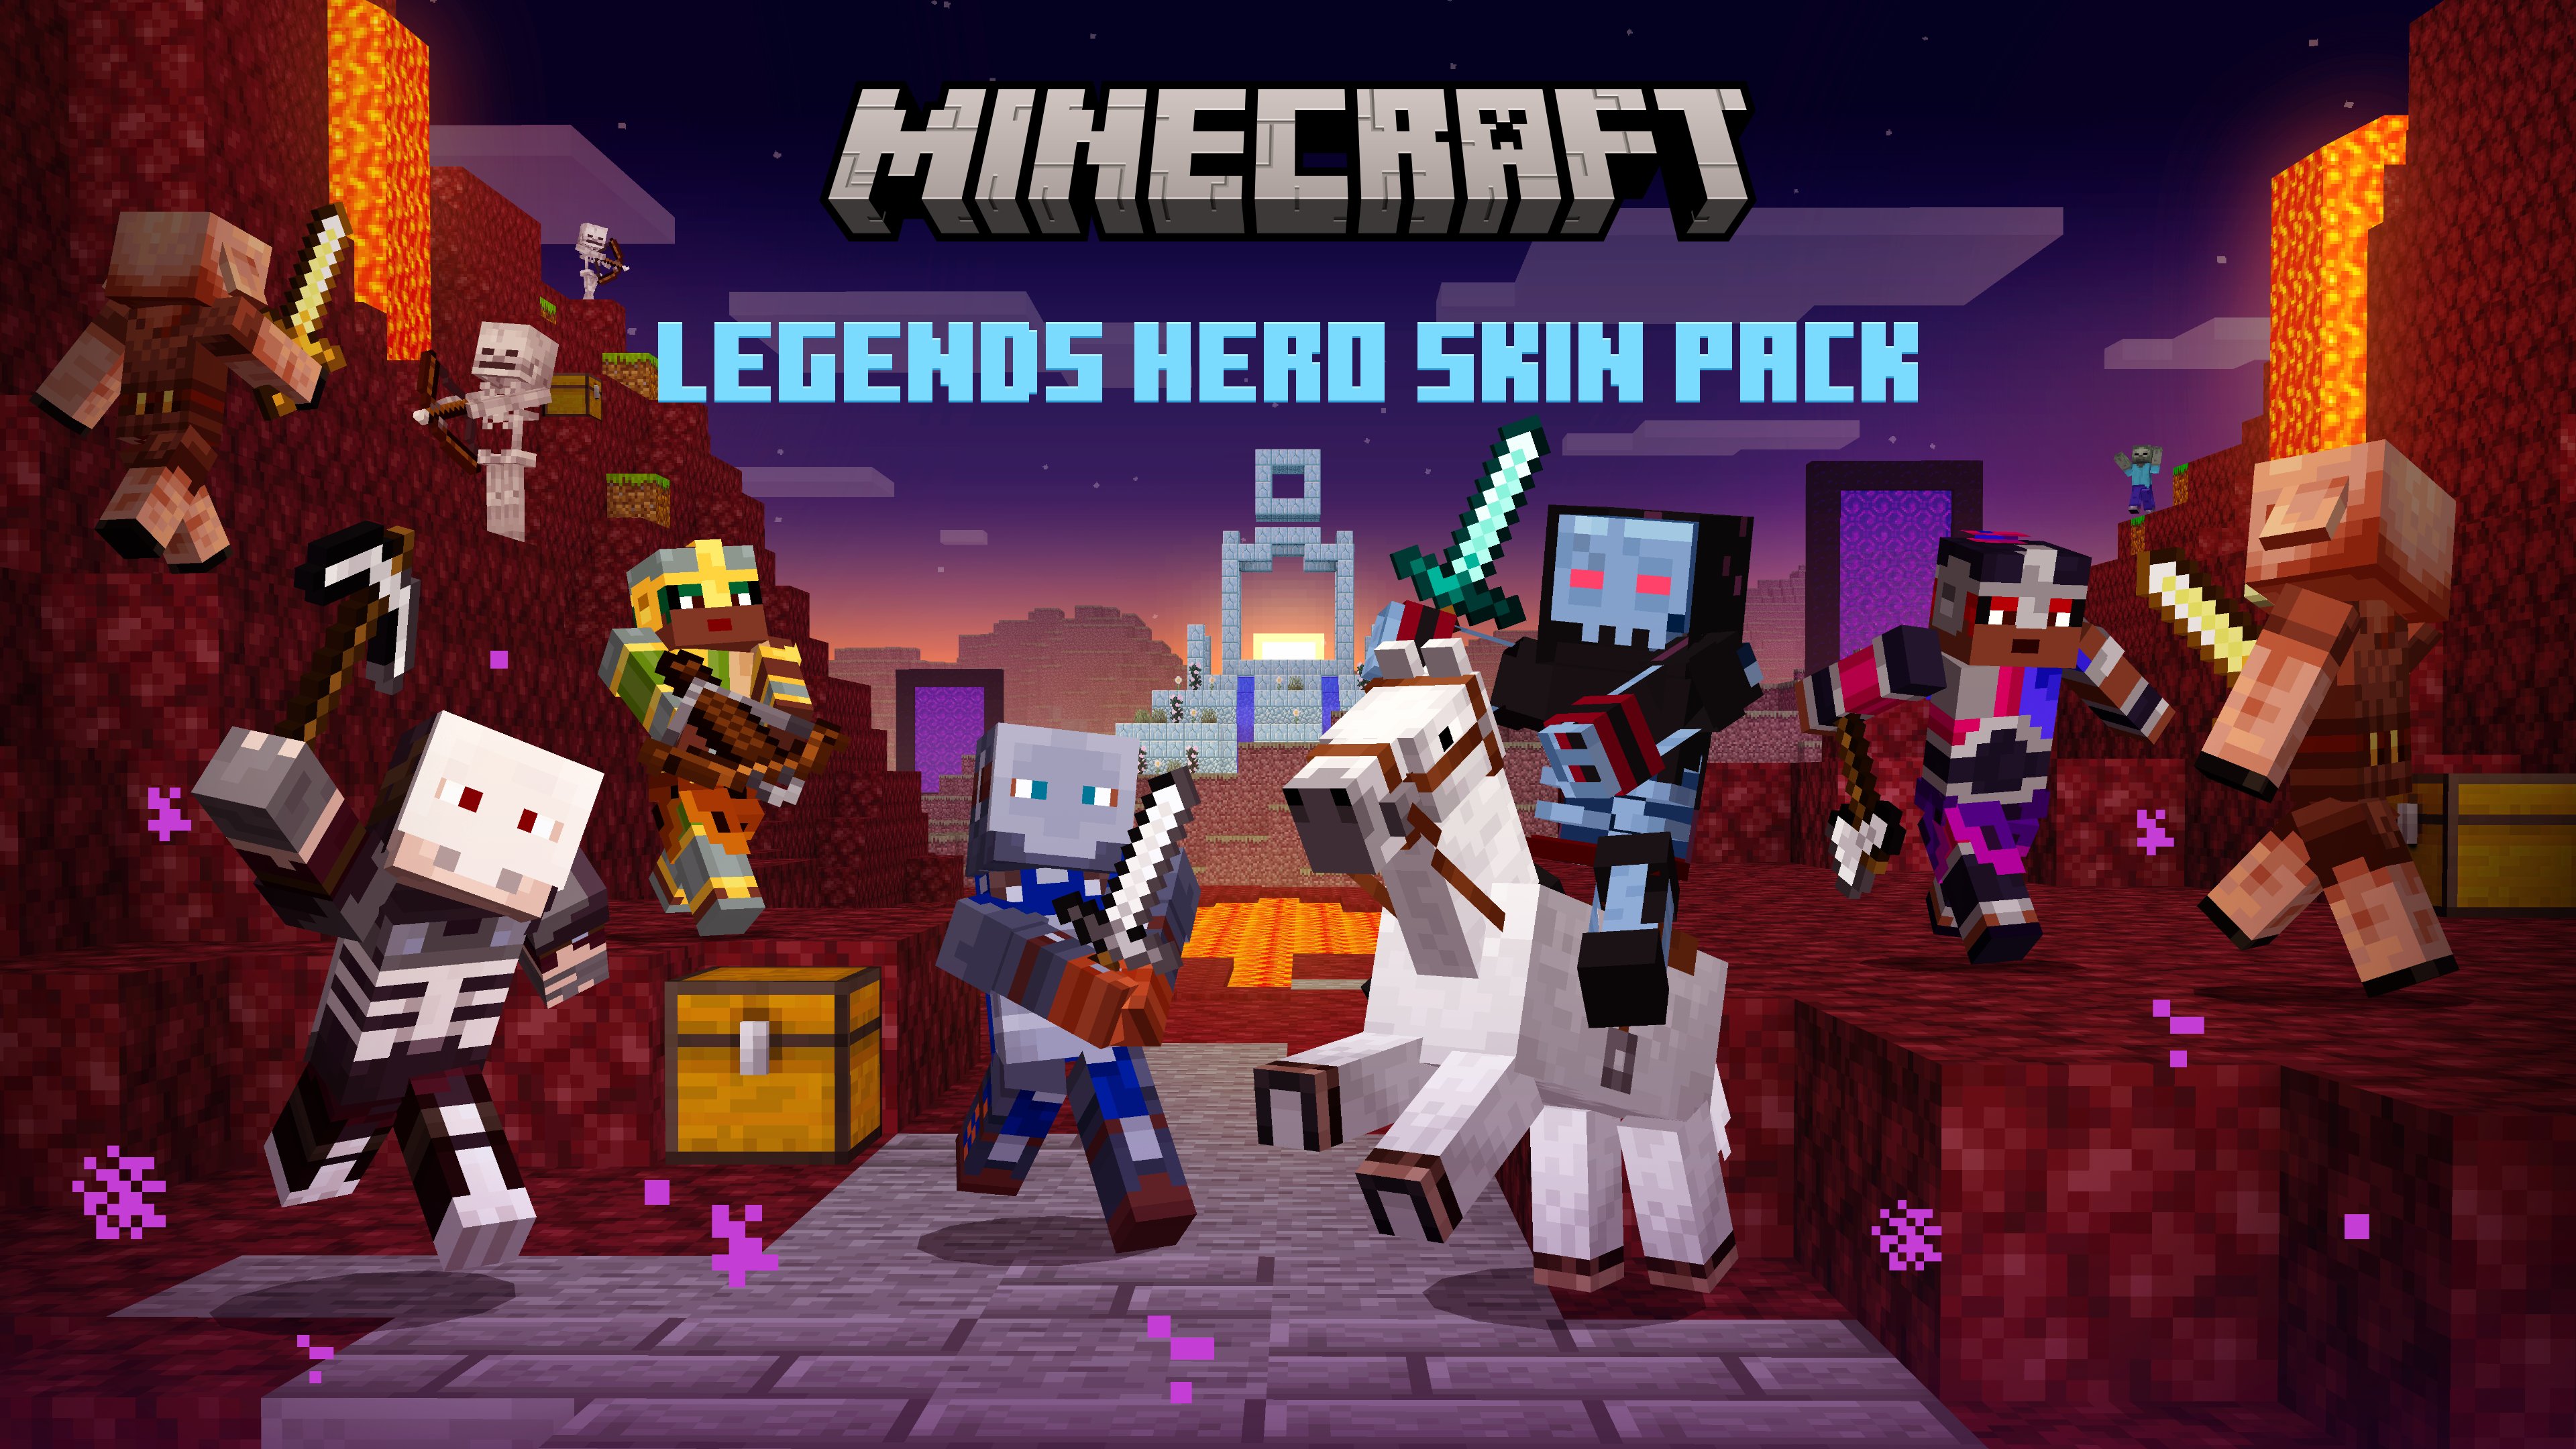 Minecraft Legends on X: It's time to get spooky with the Minecraft Legends  Hero skin pack, now available in Minecraft: Bedrock Edition! ​ ​ You'll get  5 exclusive skins, including the Bony